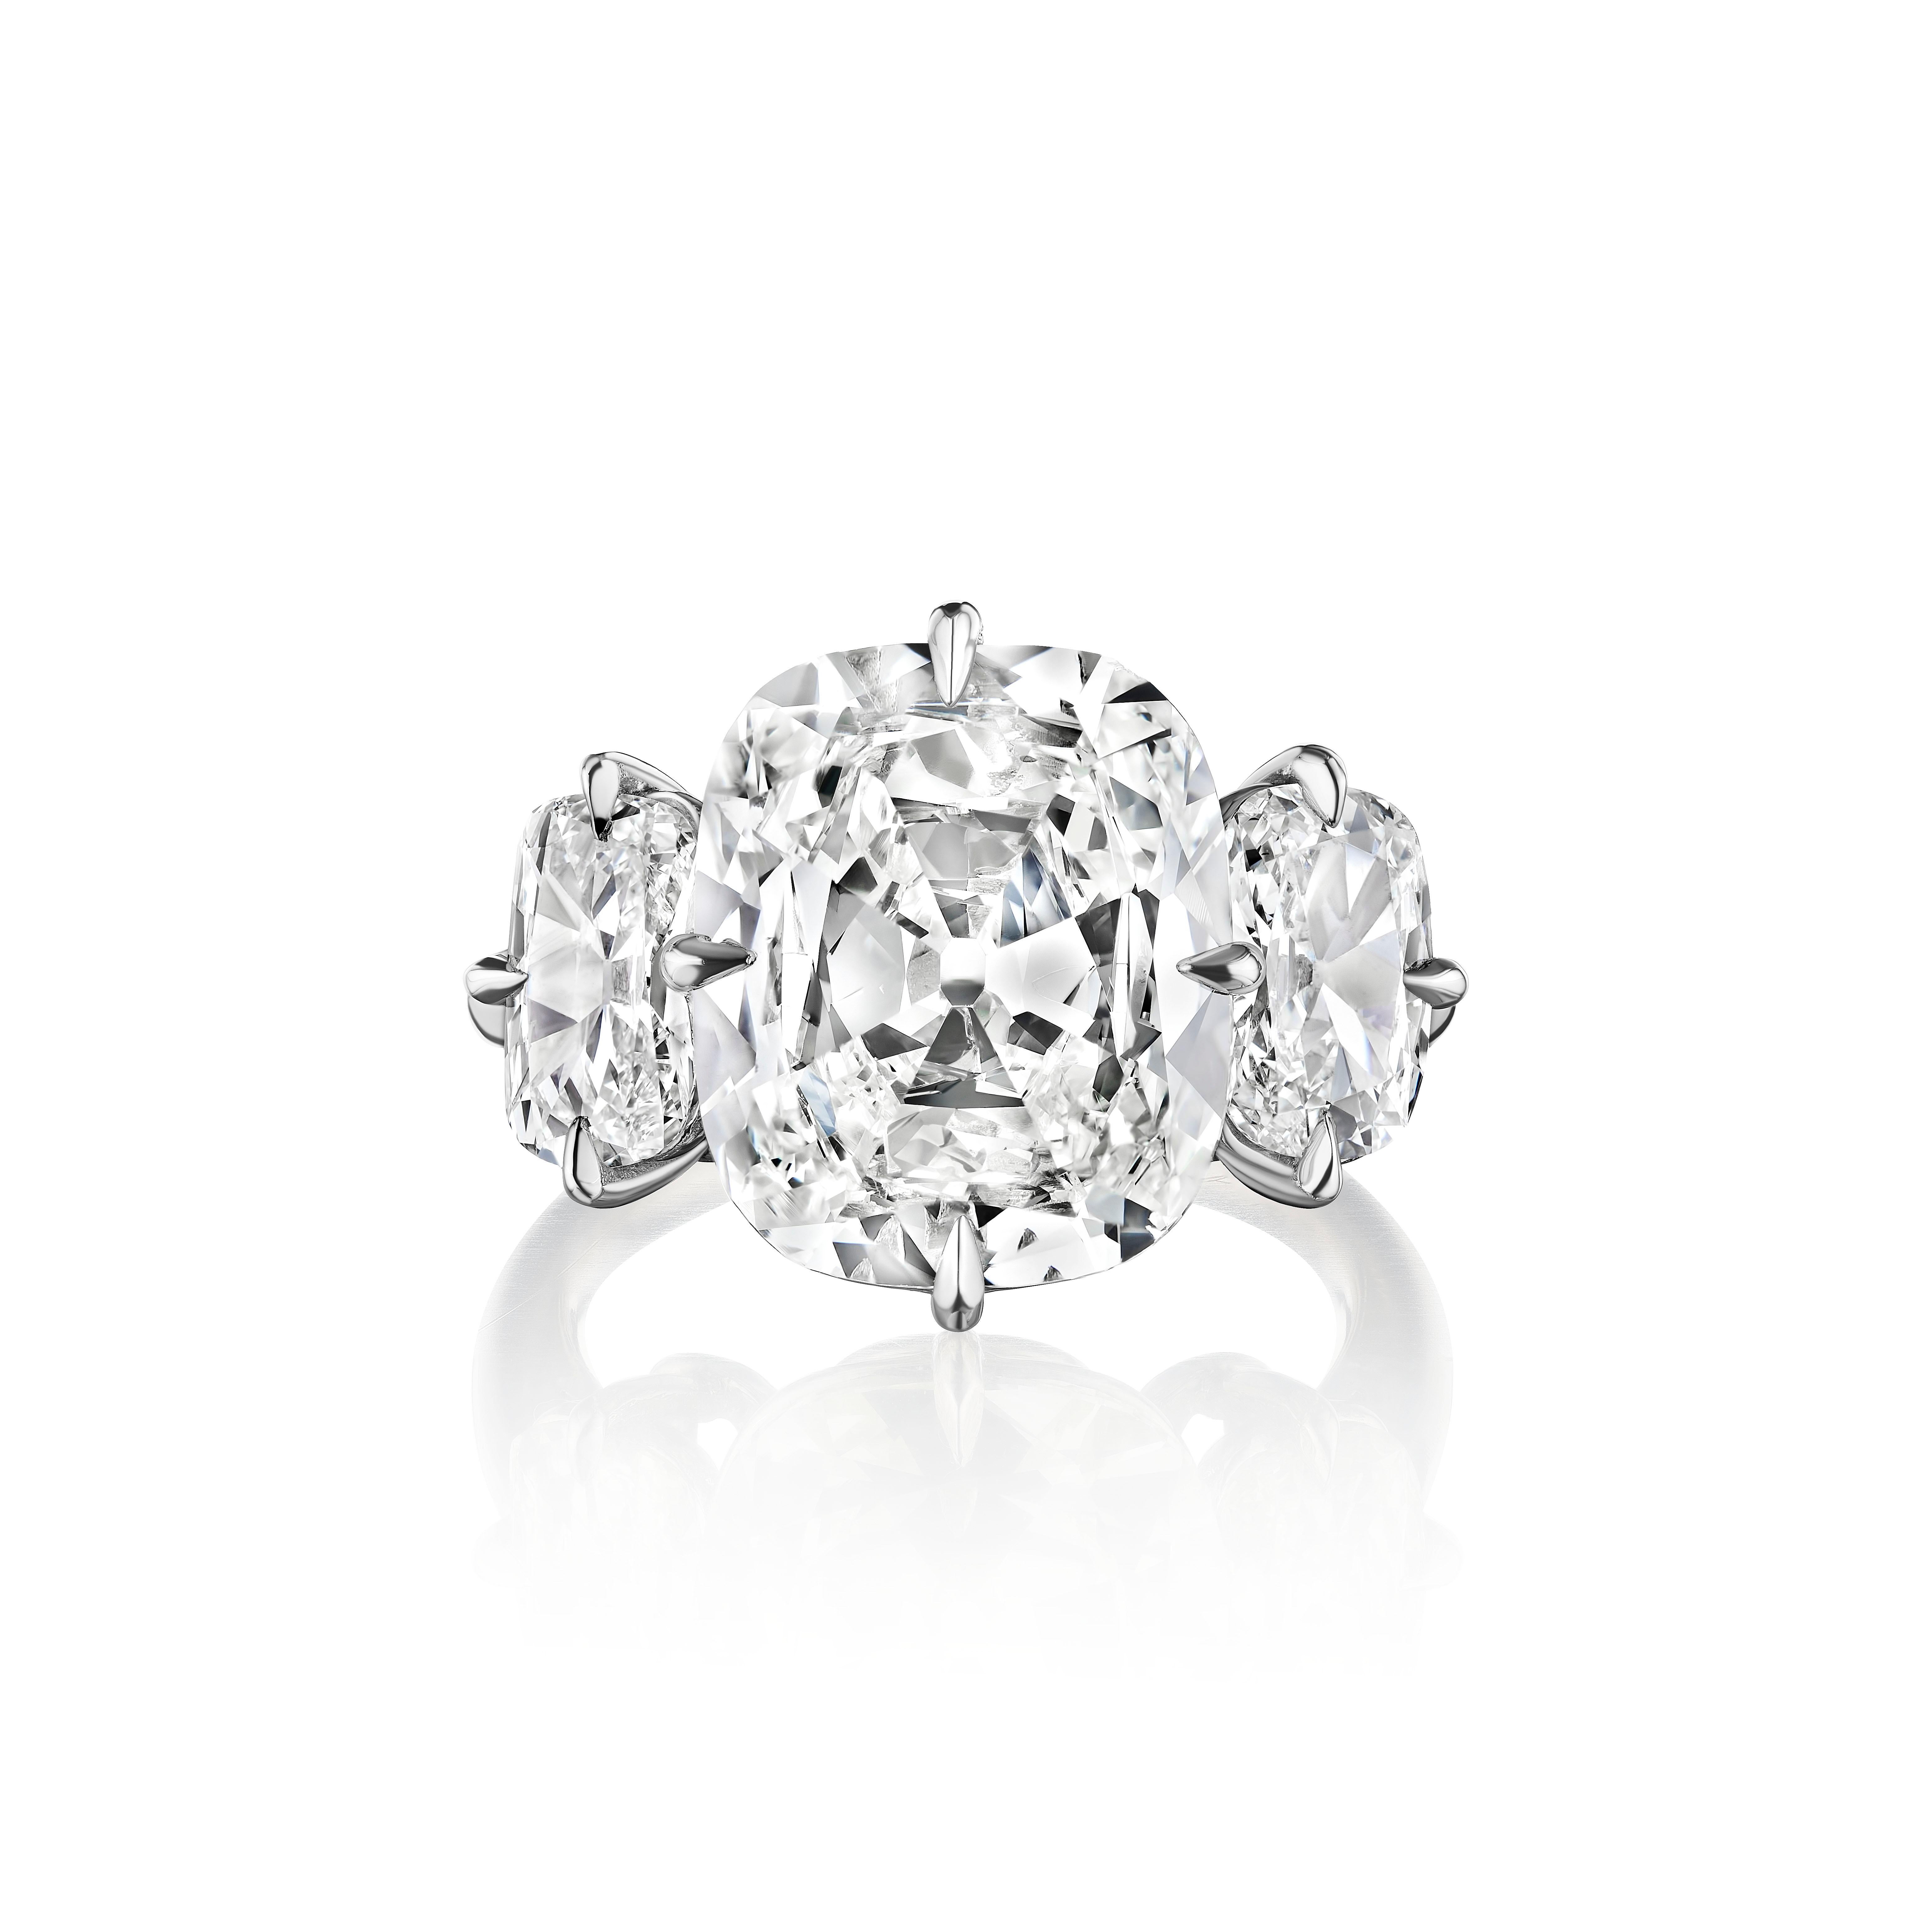 The Ultimate Antique Cushion Cut Diamond Ring.

Centered upon a 5.36 Carat True Antique Cushion, with GIA Certificate stating the stone is K color, VS2 clarity.
Flanked by elongated Cushions weighing 1.31 Carats.
Set in Platinum.

Stone spreads like